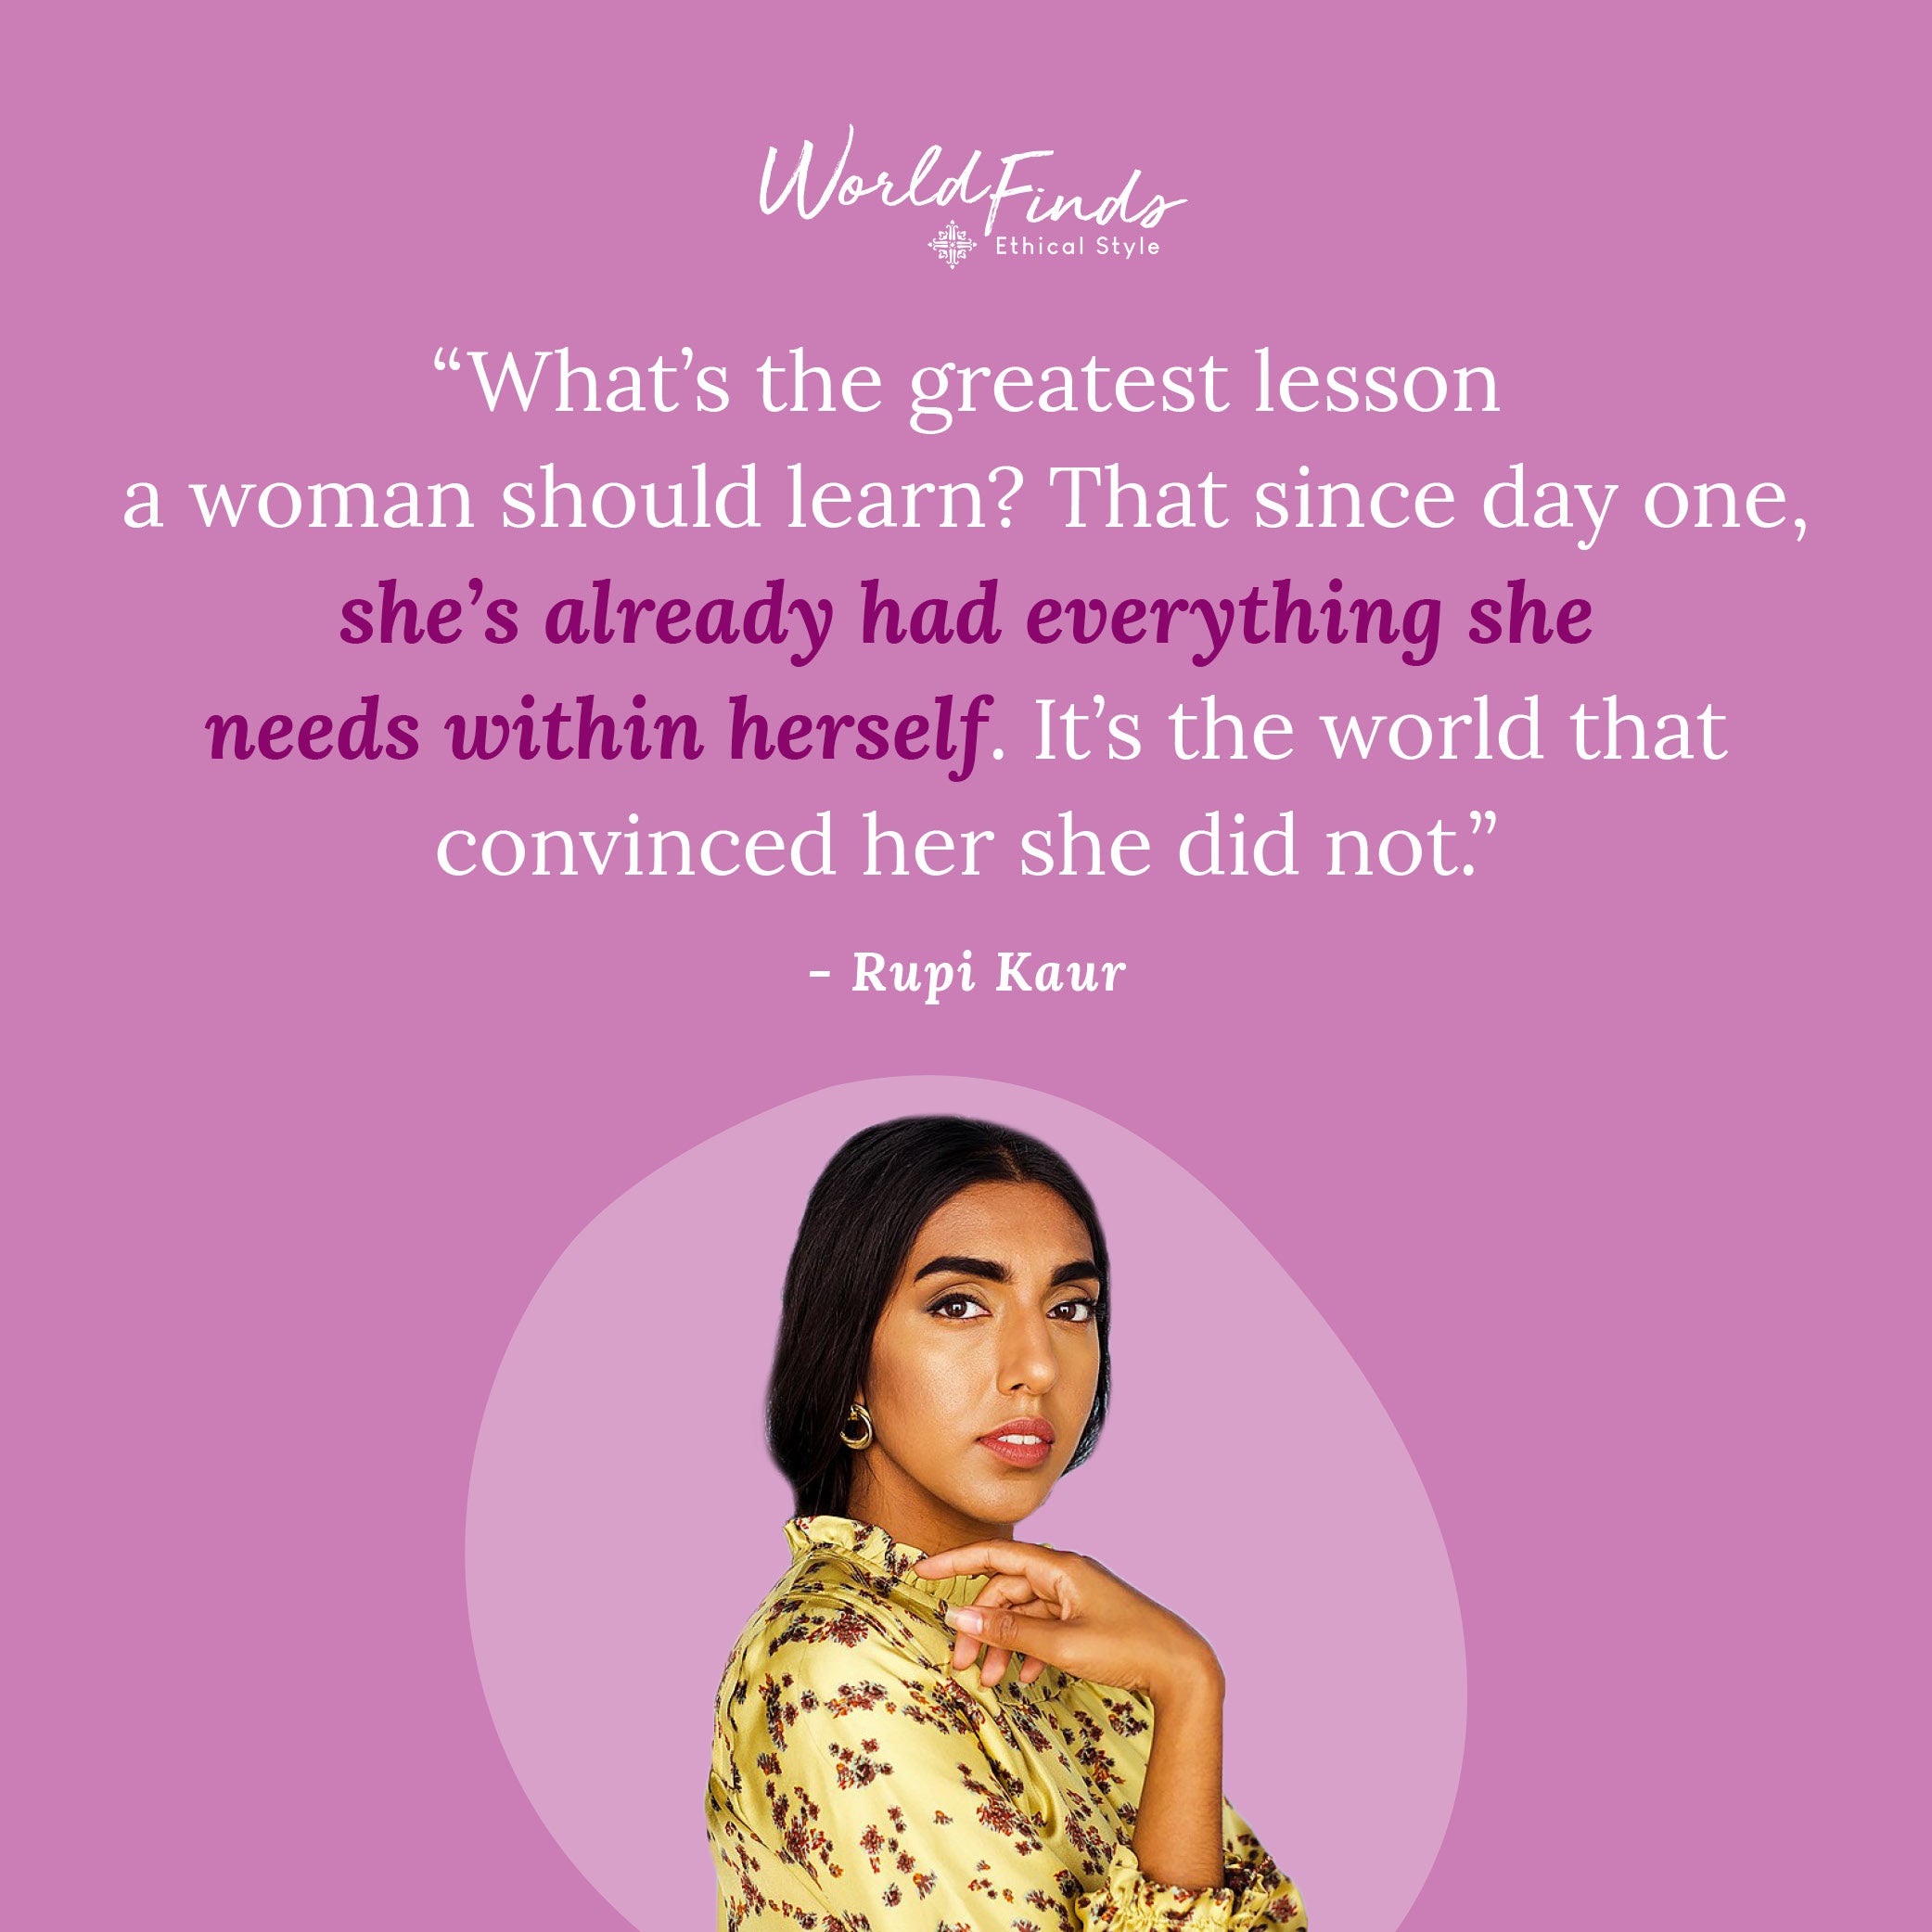 Quote from Rupi Kaur, "What's the greatest lesson a woman should learn? That since day one, she's already had everything she needs within herself. It's the world that convinced her she did not."